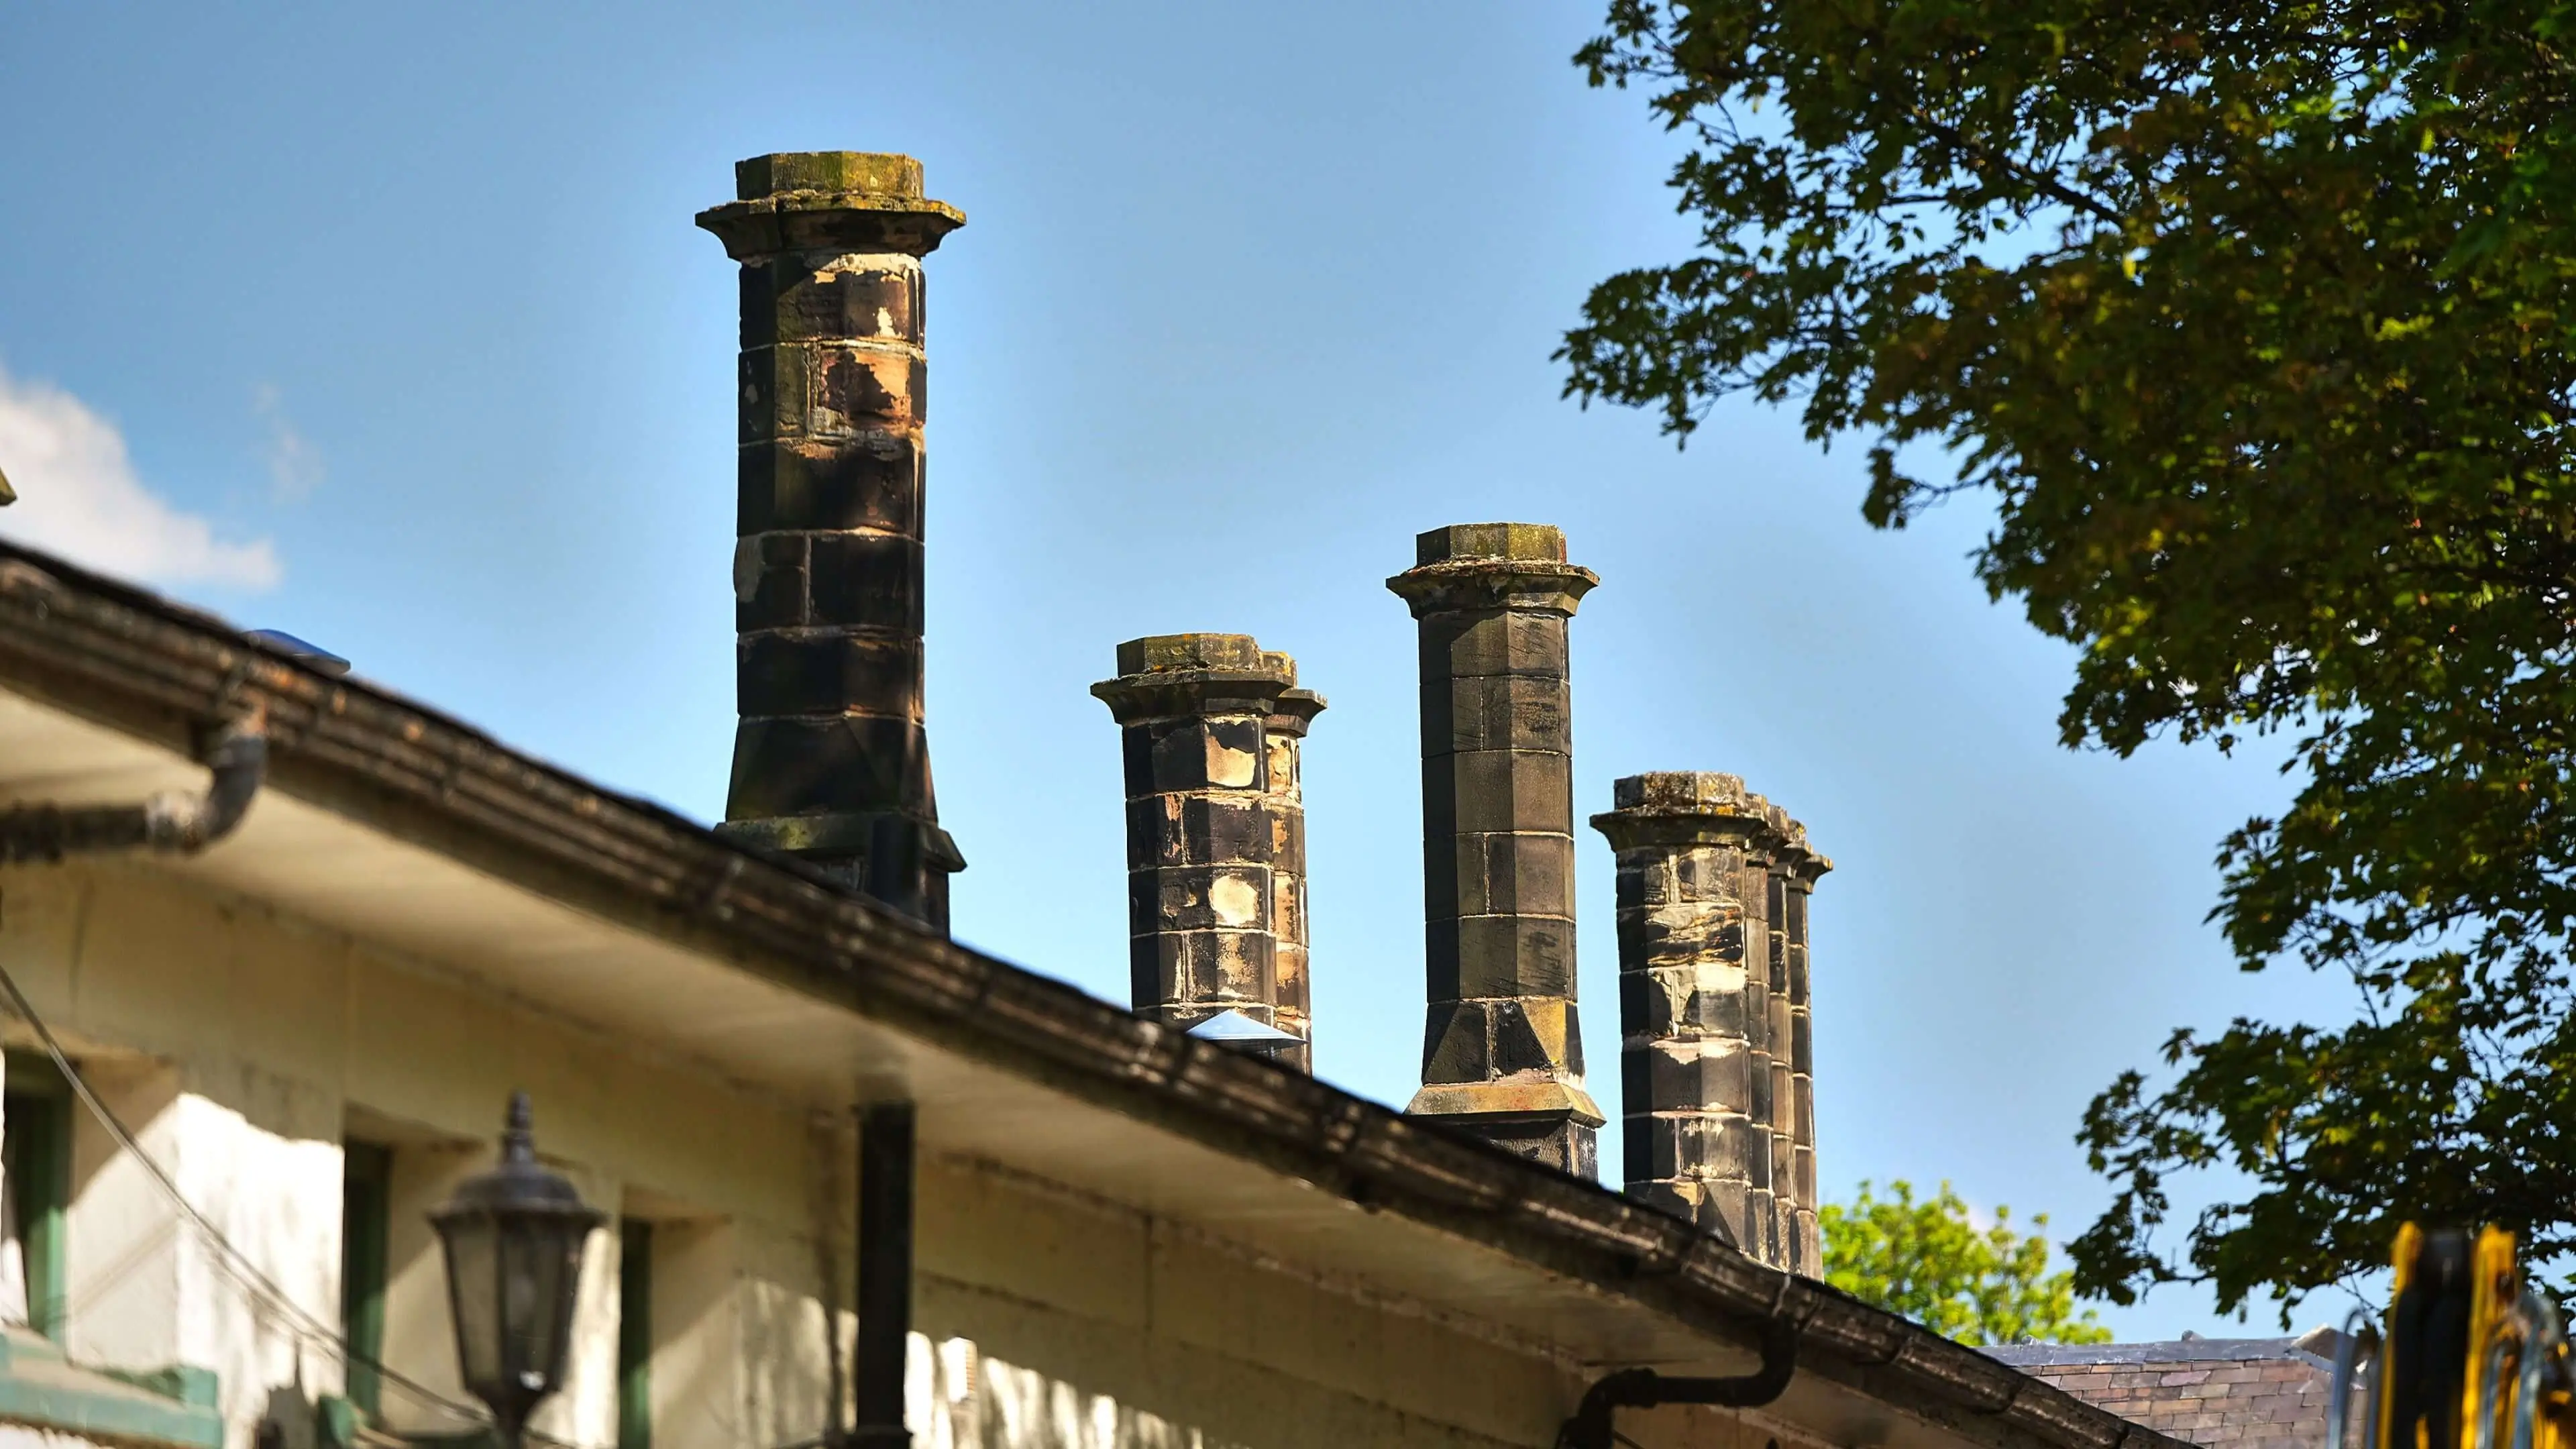 Old chimneys on the roof of North Road Station Museum